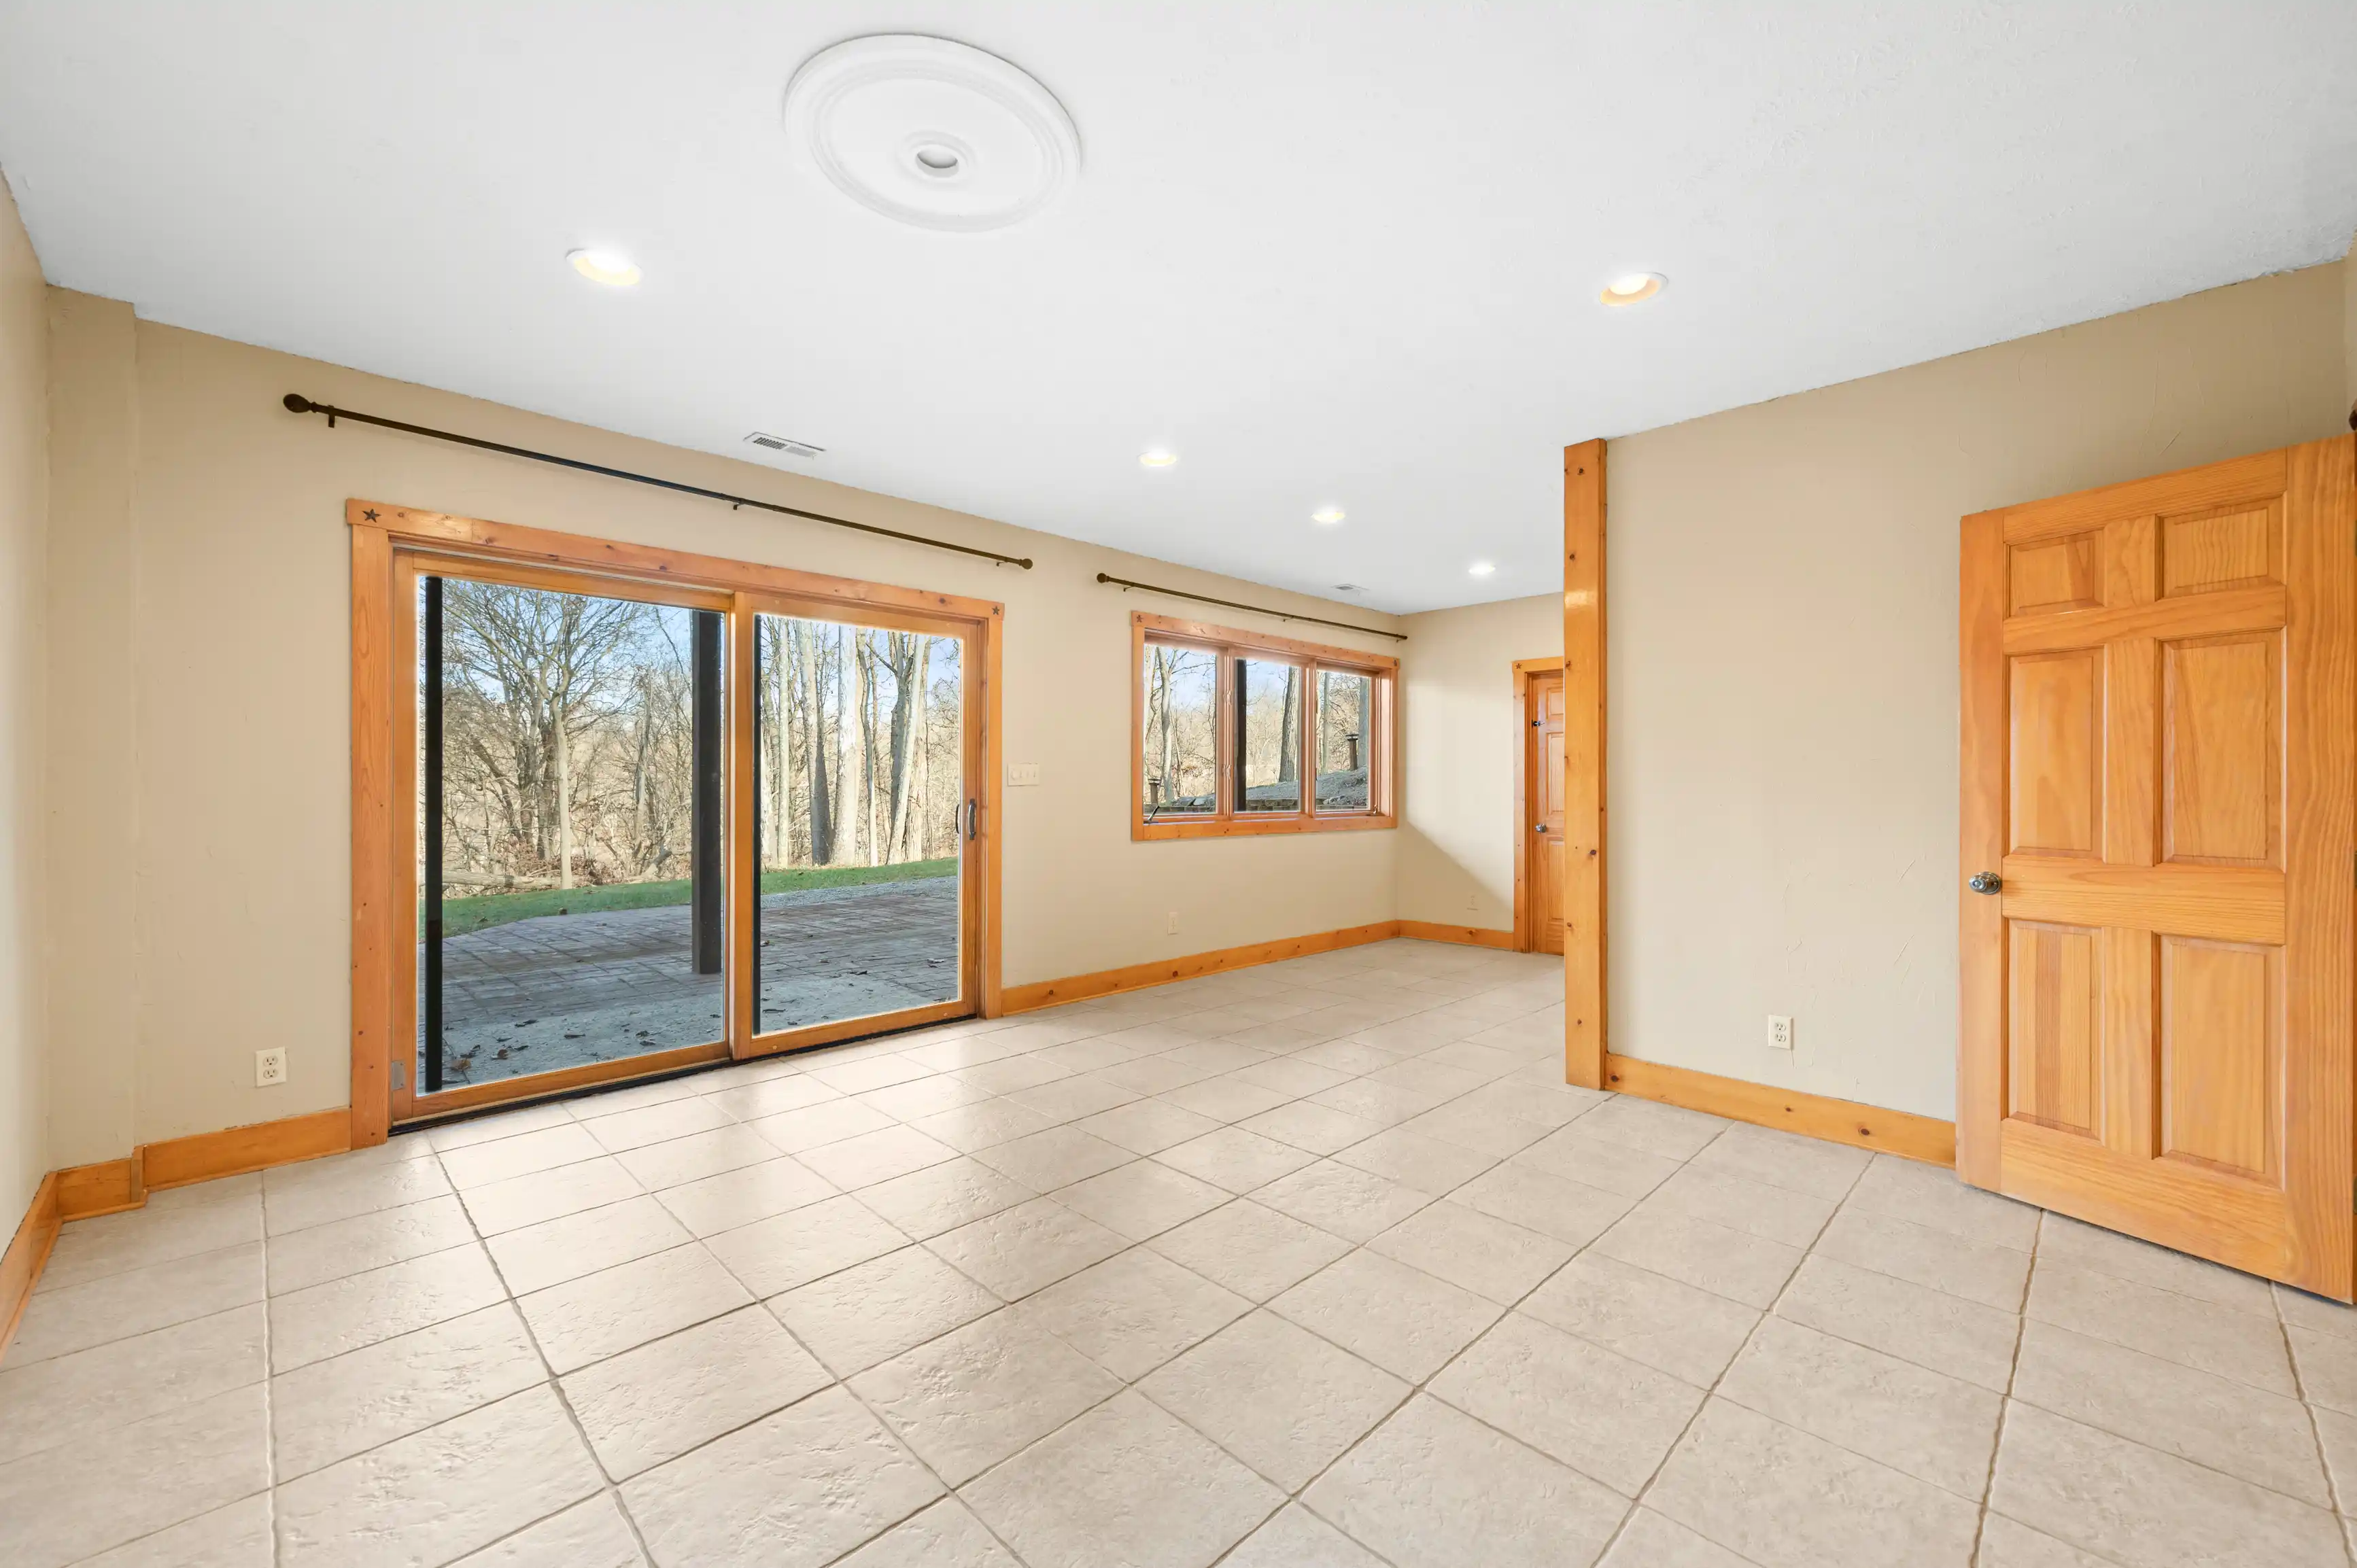 Empty room with tiled floor, wooden trim, sliding glass door to the backyard, and wooden entry door on the right.